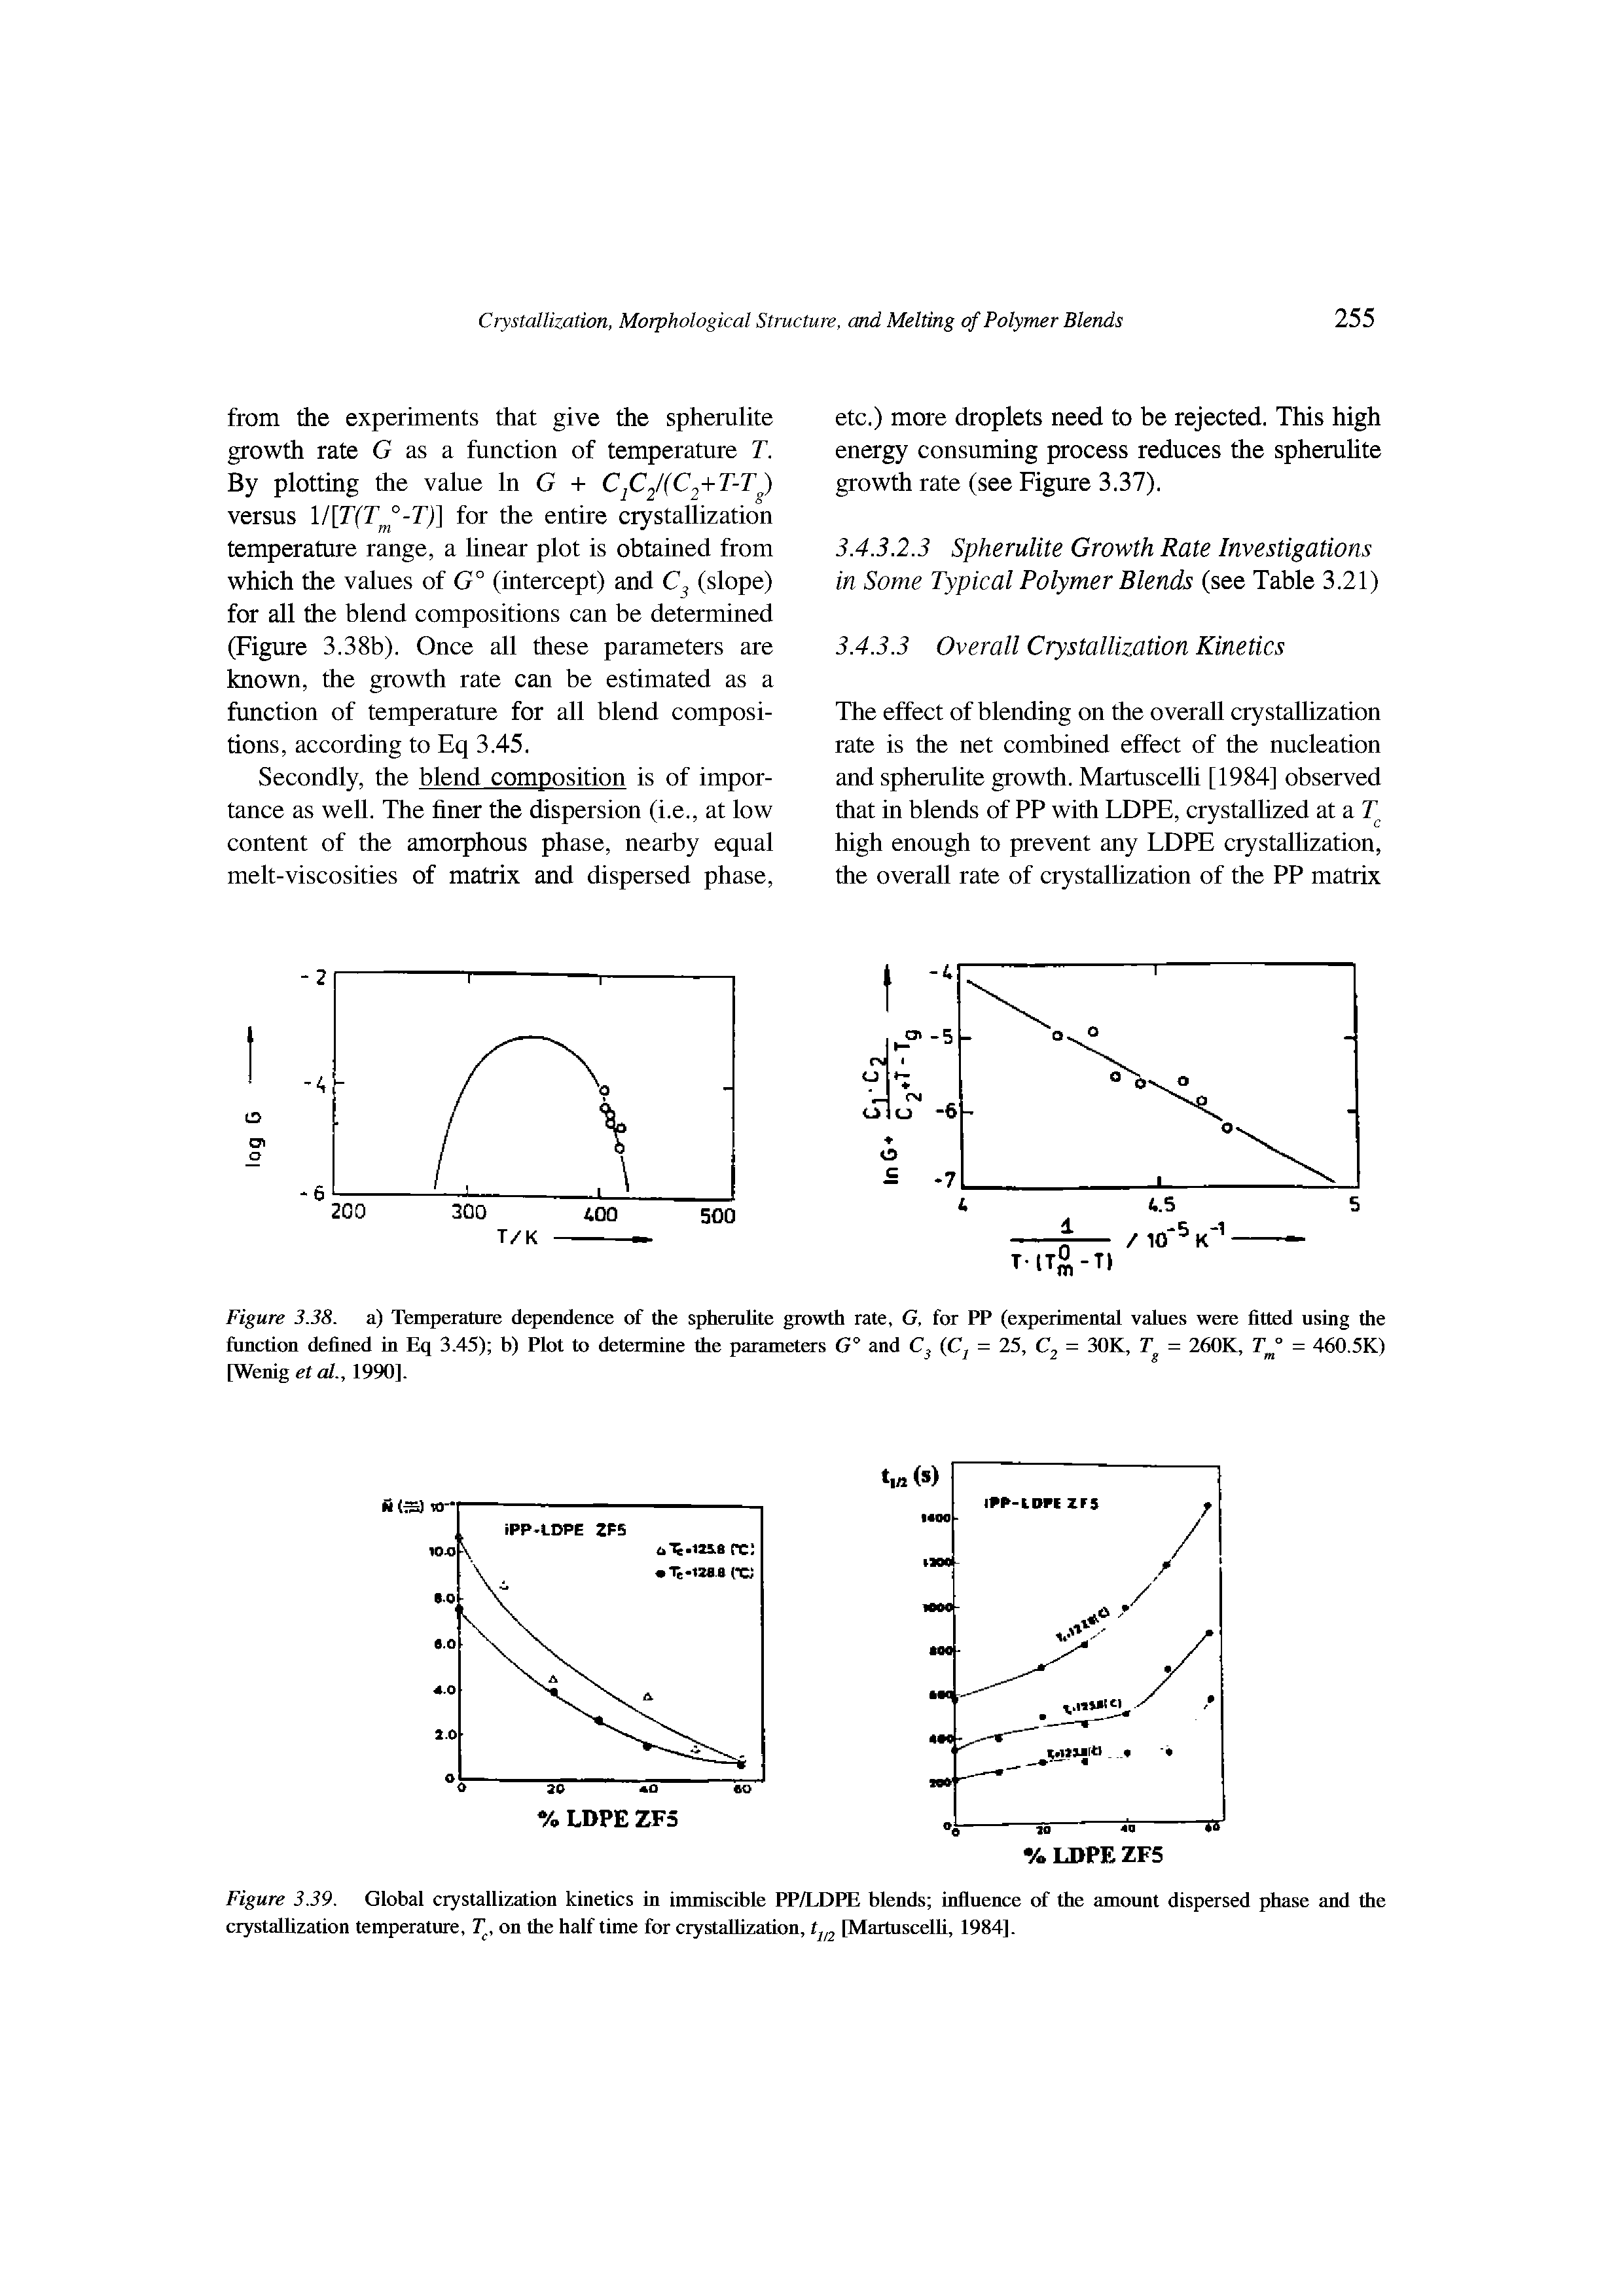 Figure 3.39. Global crystallization kinetics in immiscible PP/LDPE blends influence of the amount dispersed phase and the crystallization temperature, 7), on the half time for crystallization, tj [Martuscelli, 1984].